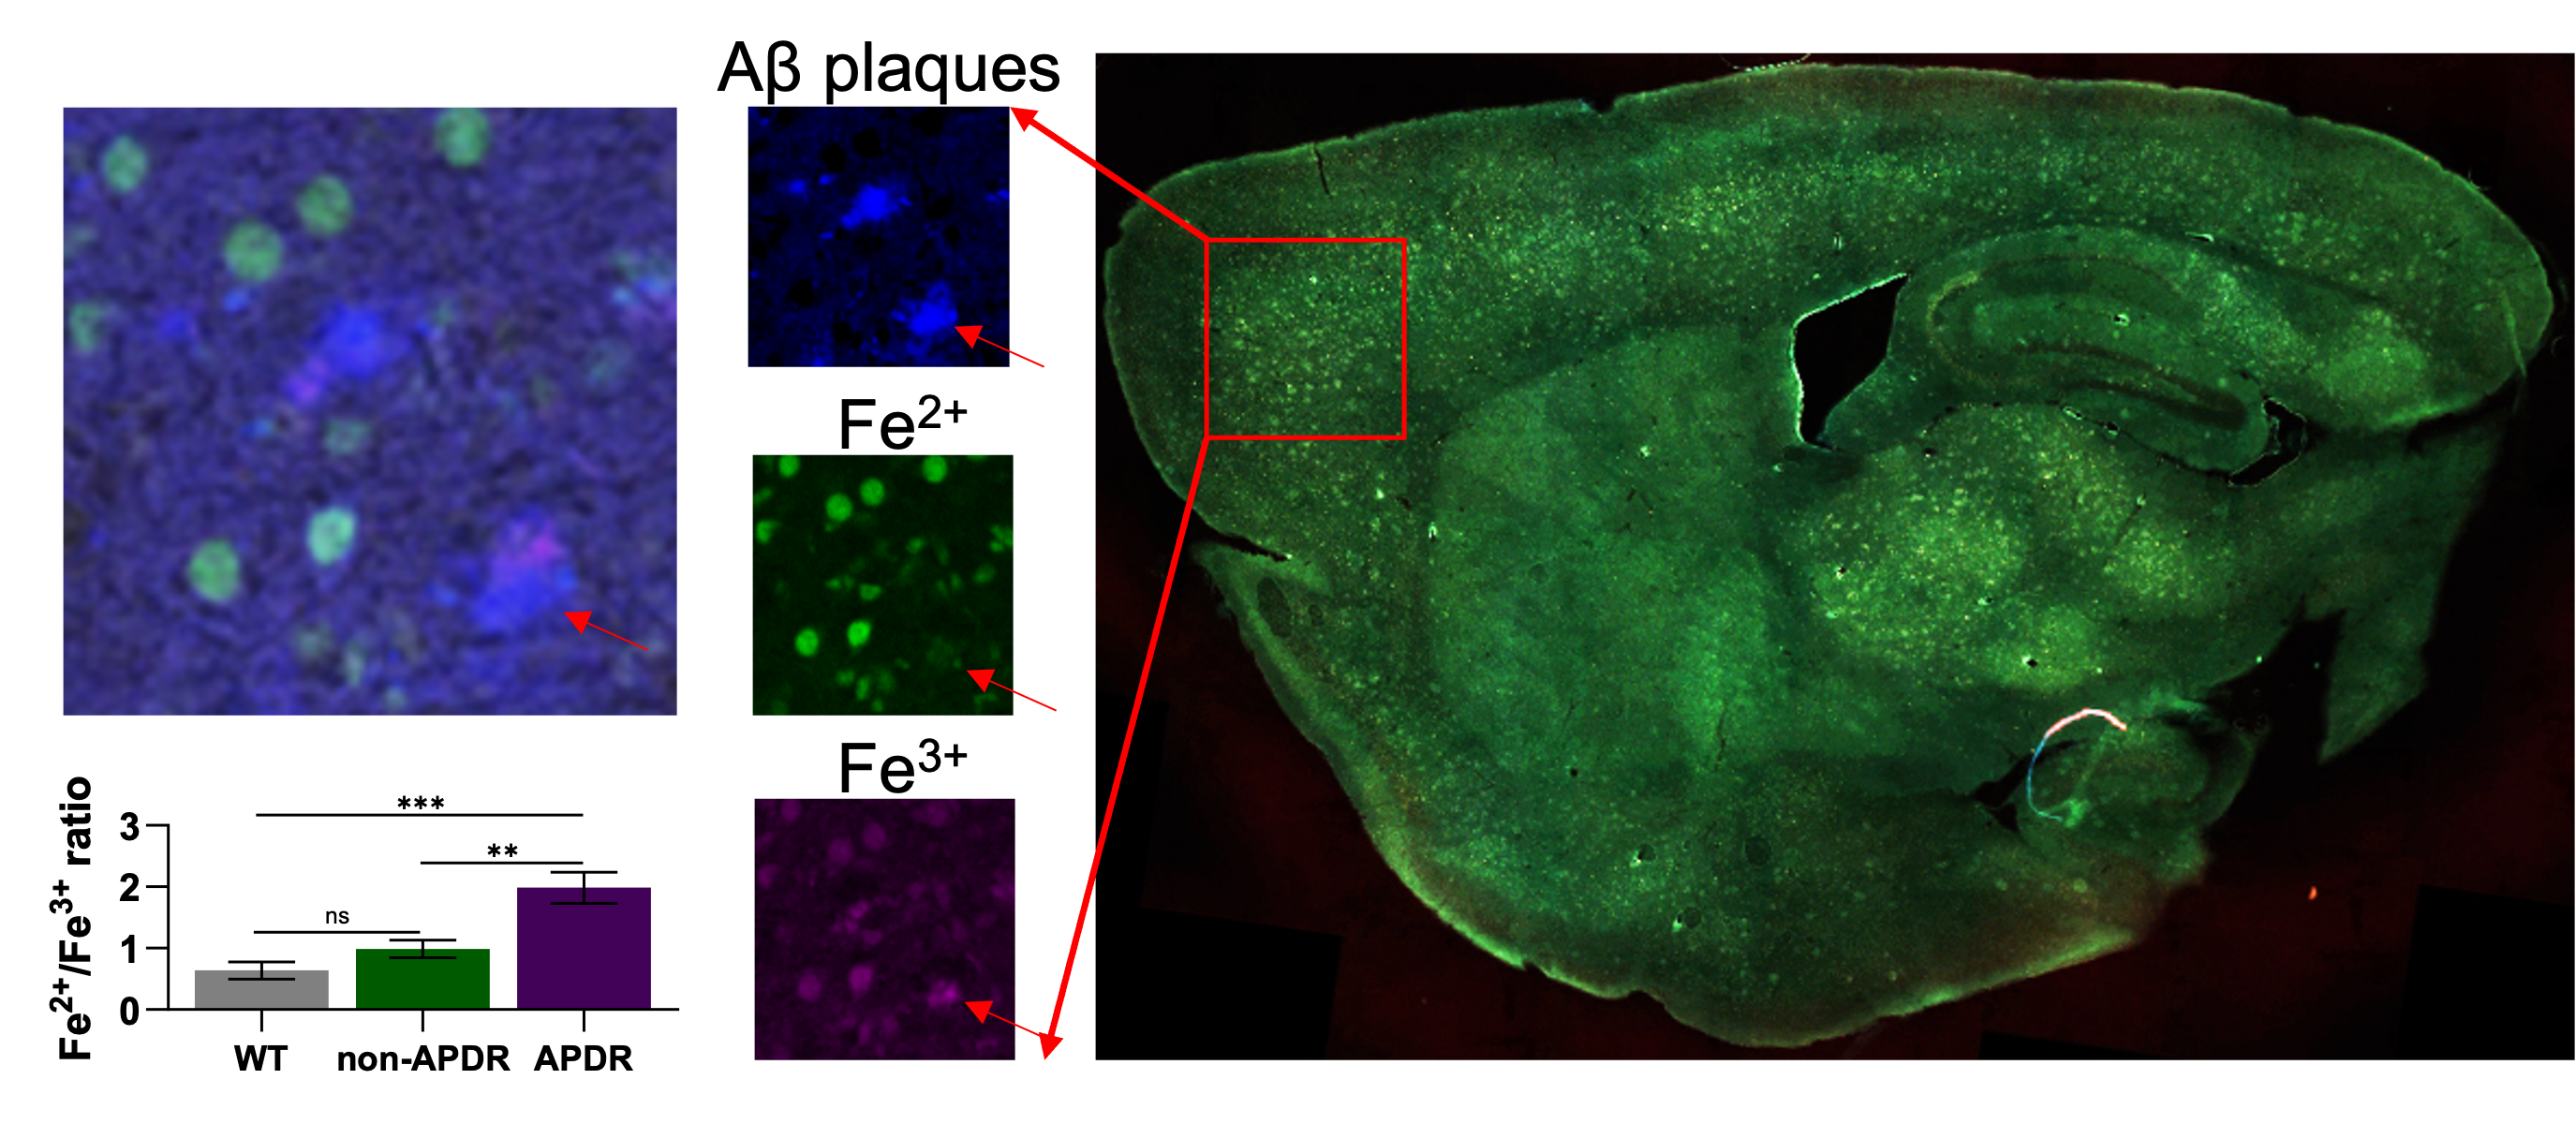 Series of images showing how different forms of iron are collocated with amyloid beta plaques in a slice of mouse brain